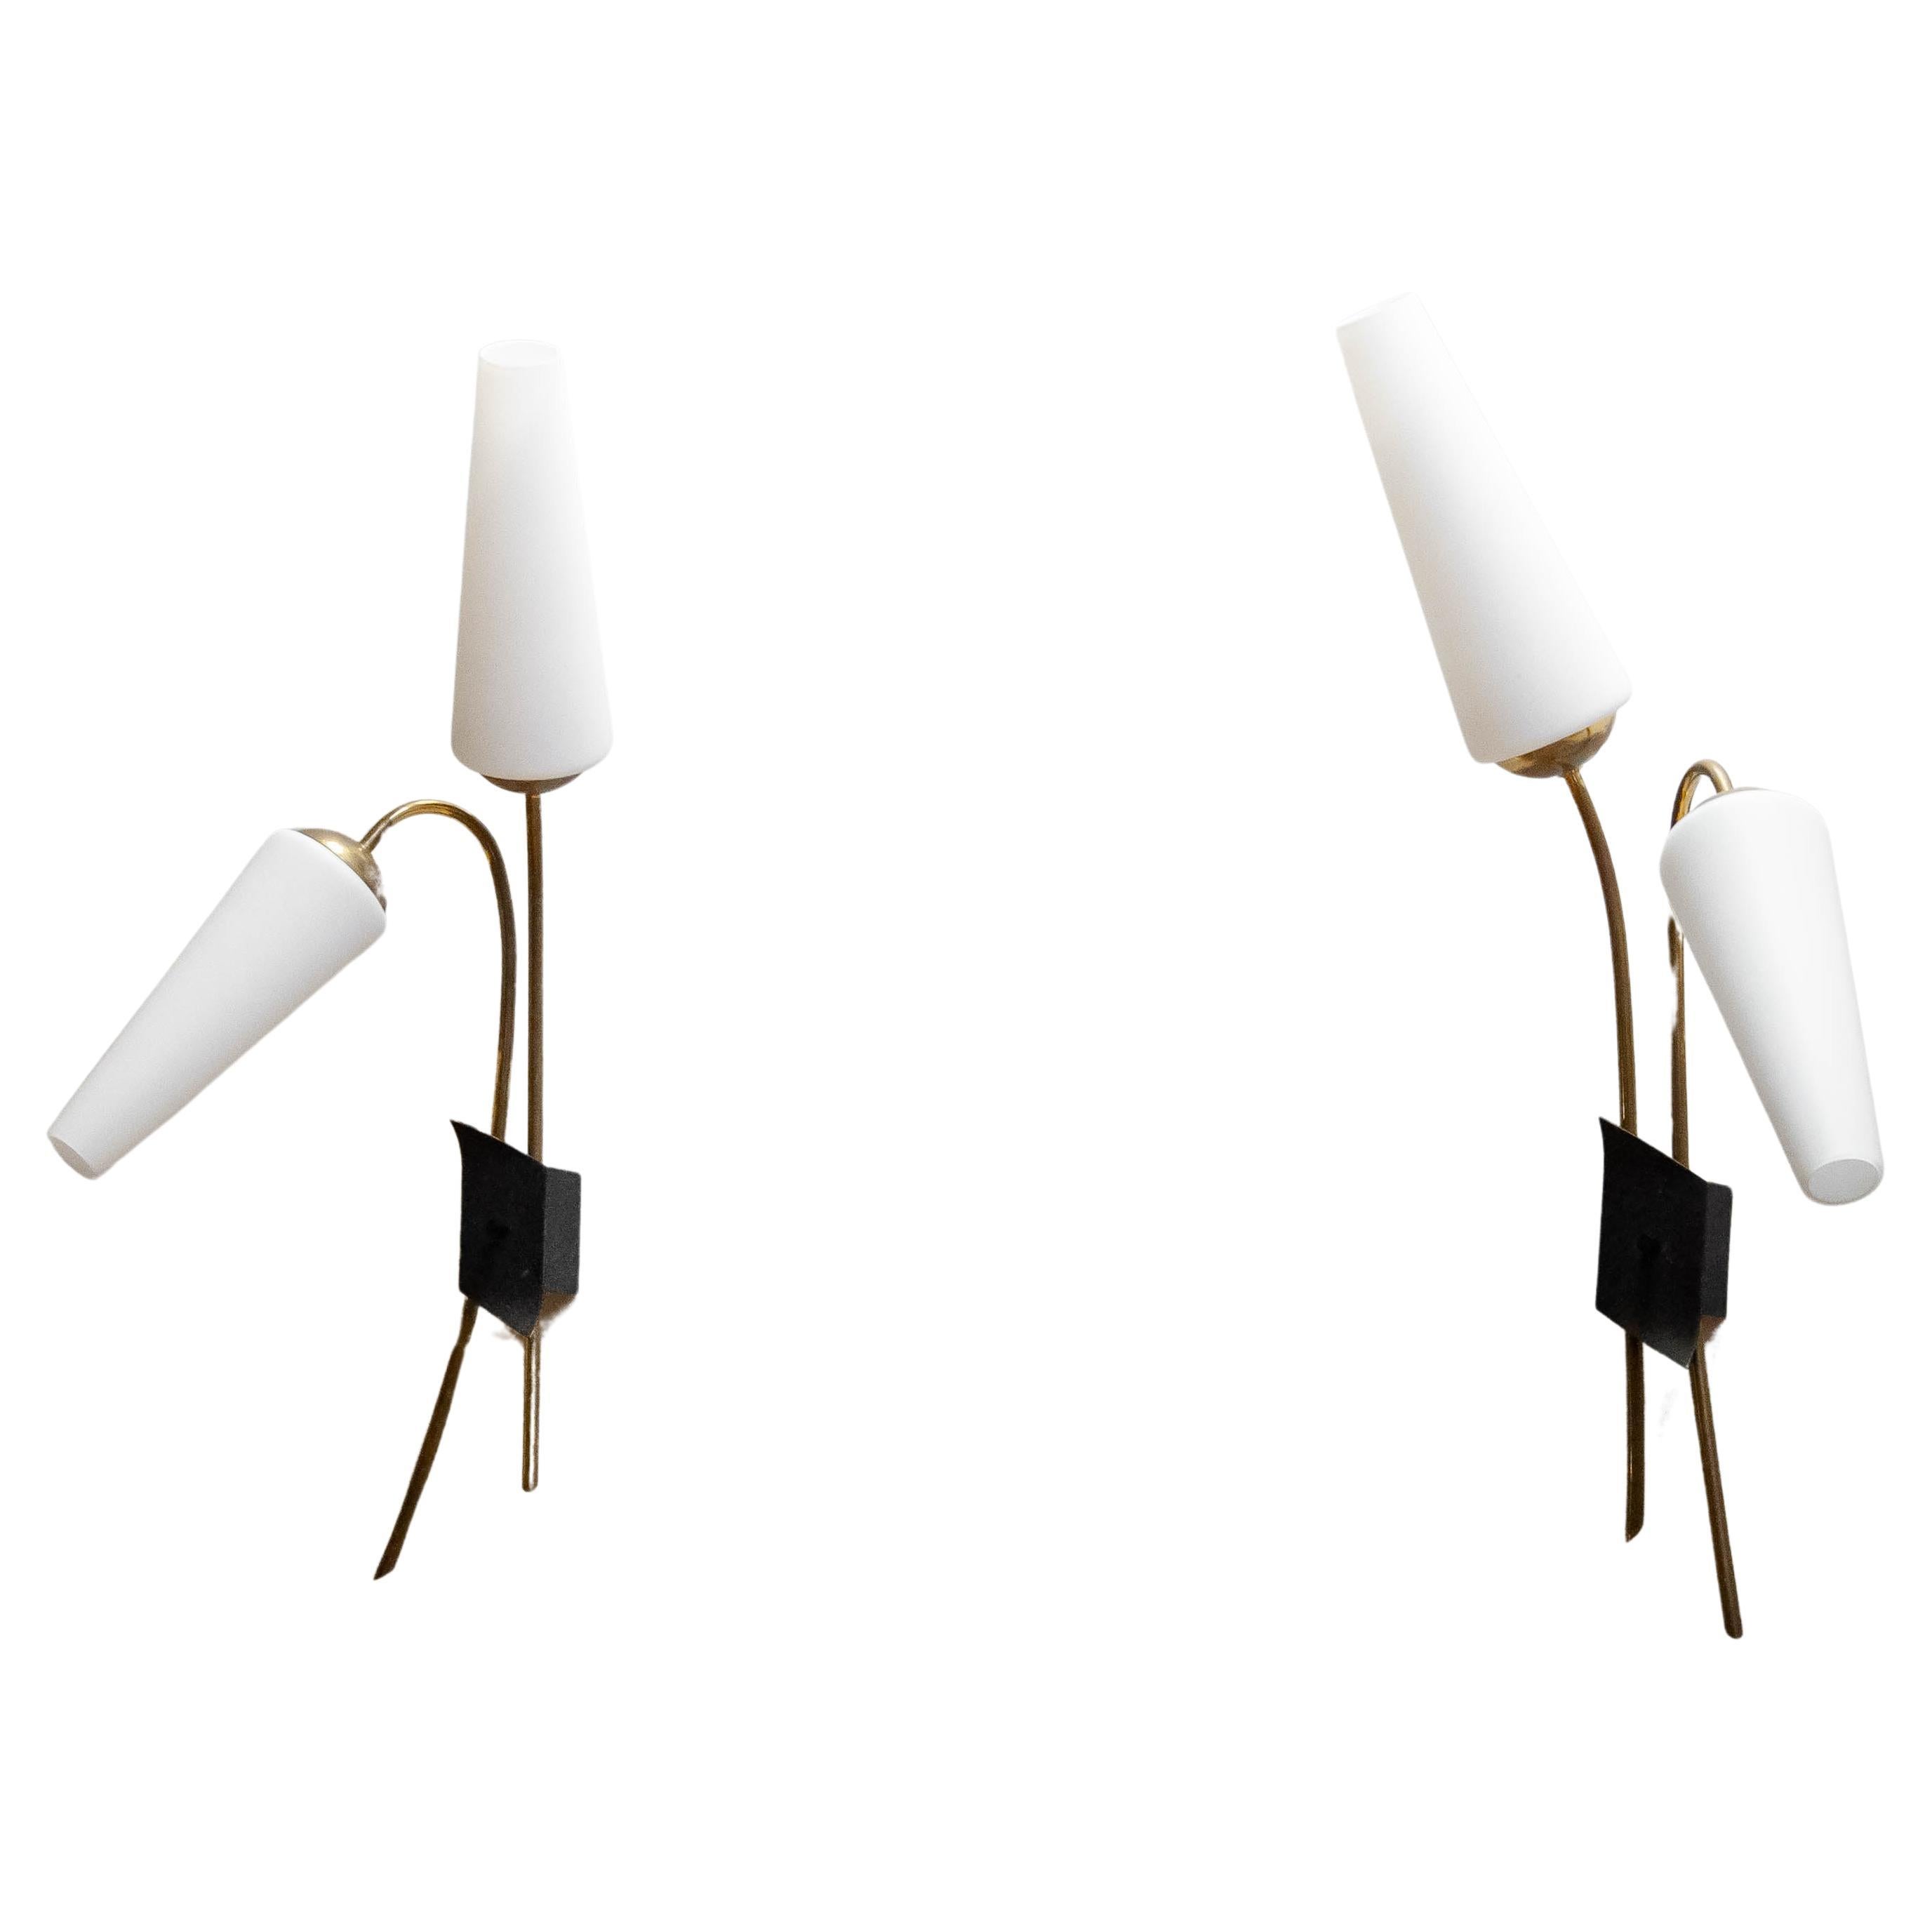 Pair French Brass And Opal Wall Lights / Sconces By Maison Lunel From The 1950s For Sale